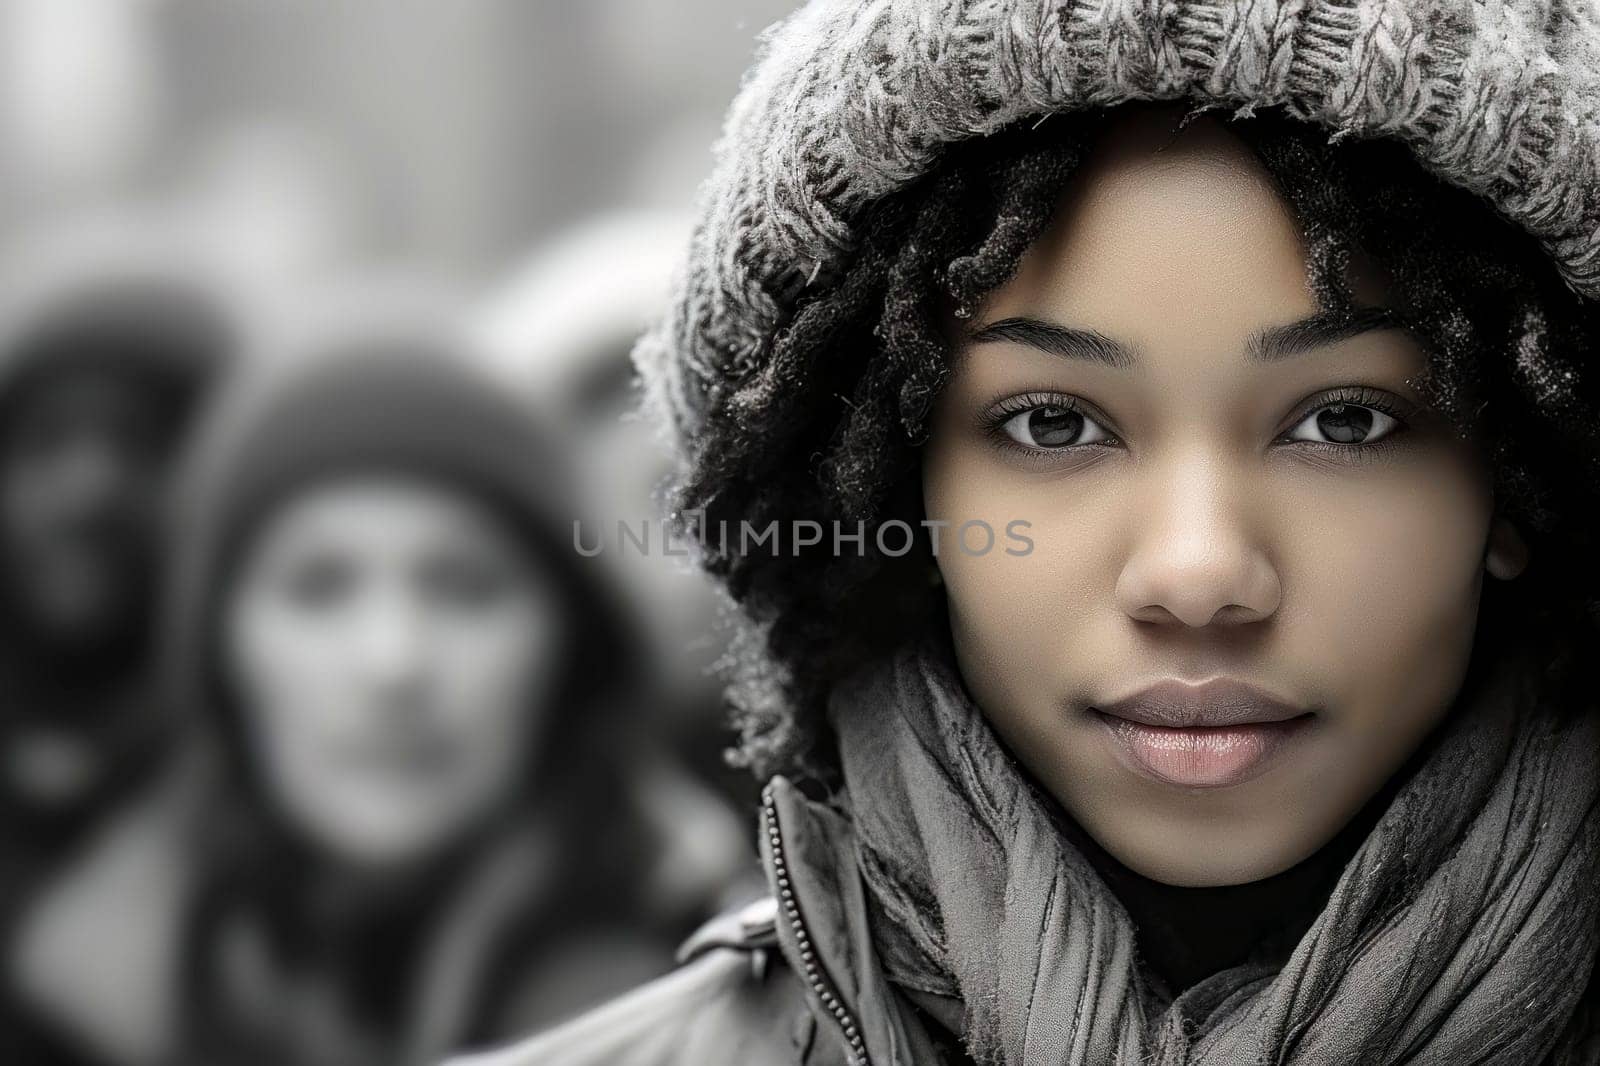 Smiling Black Girl Walking in Crowd by pippocarlot